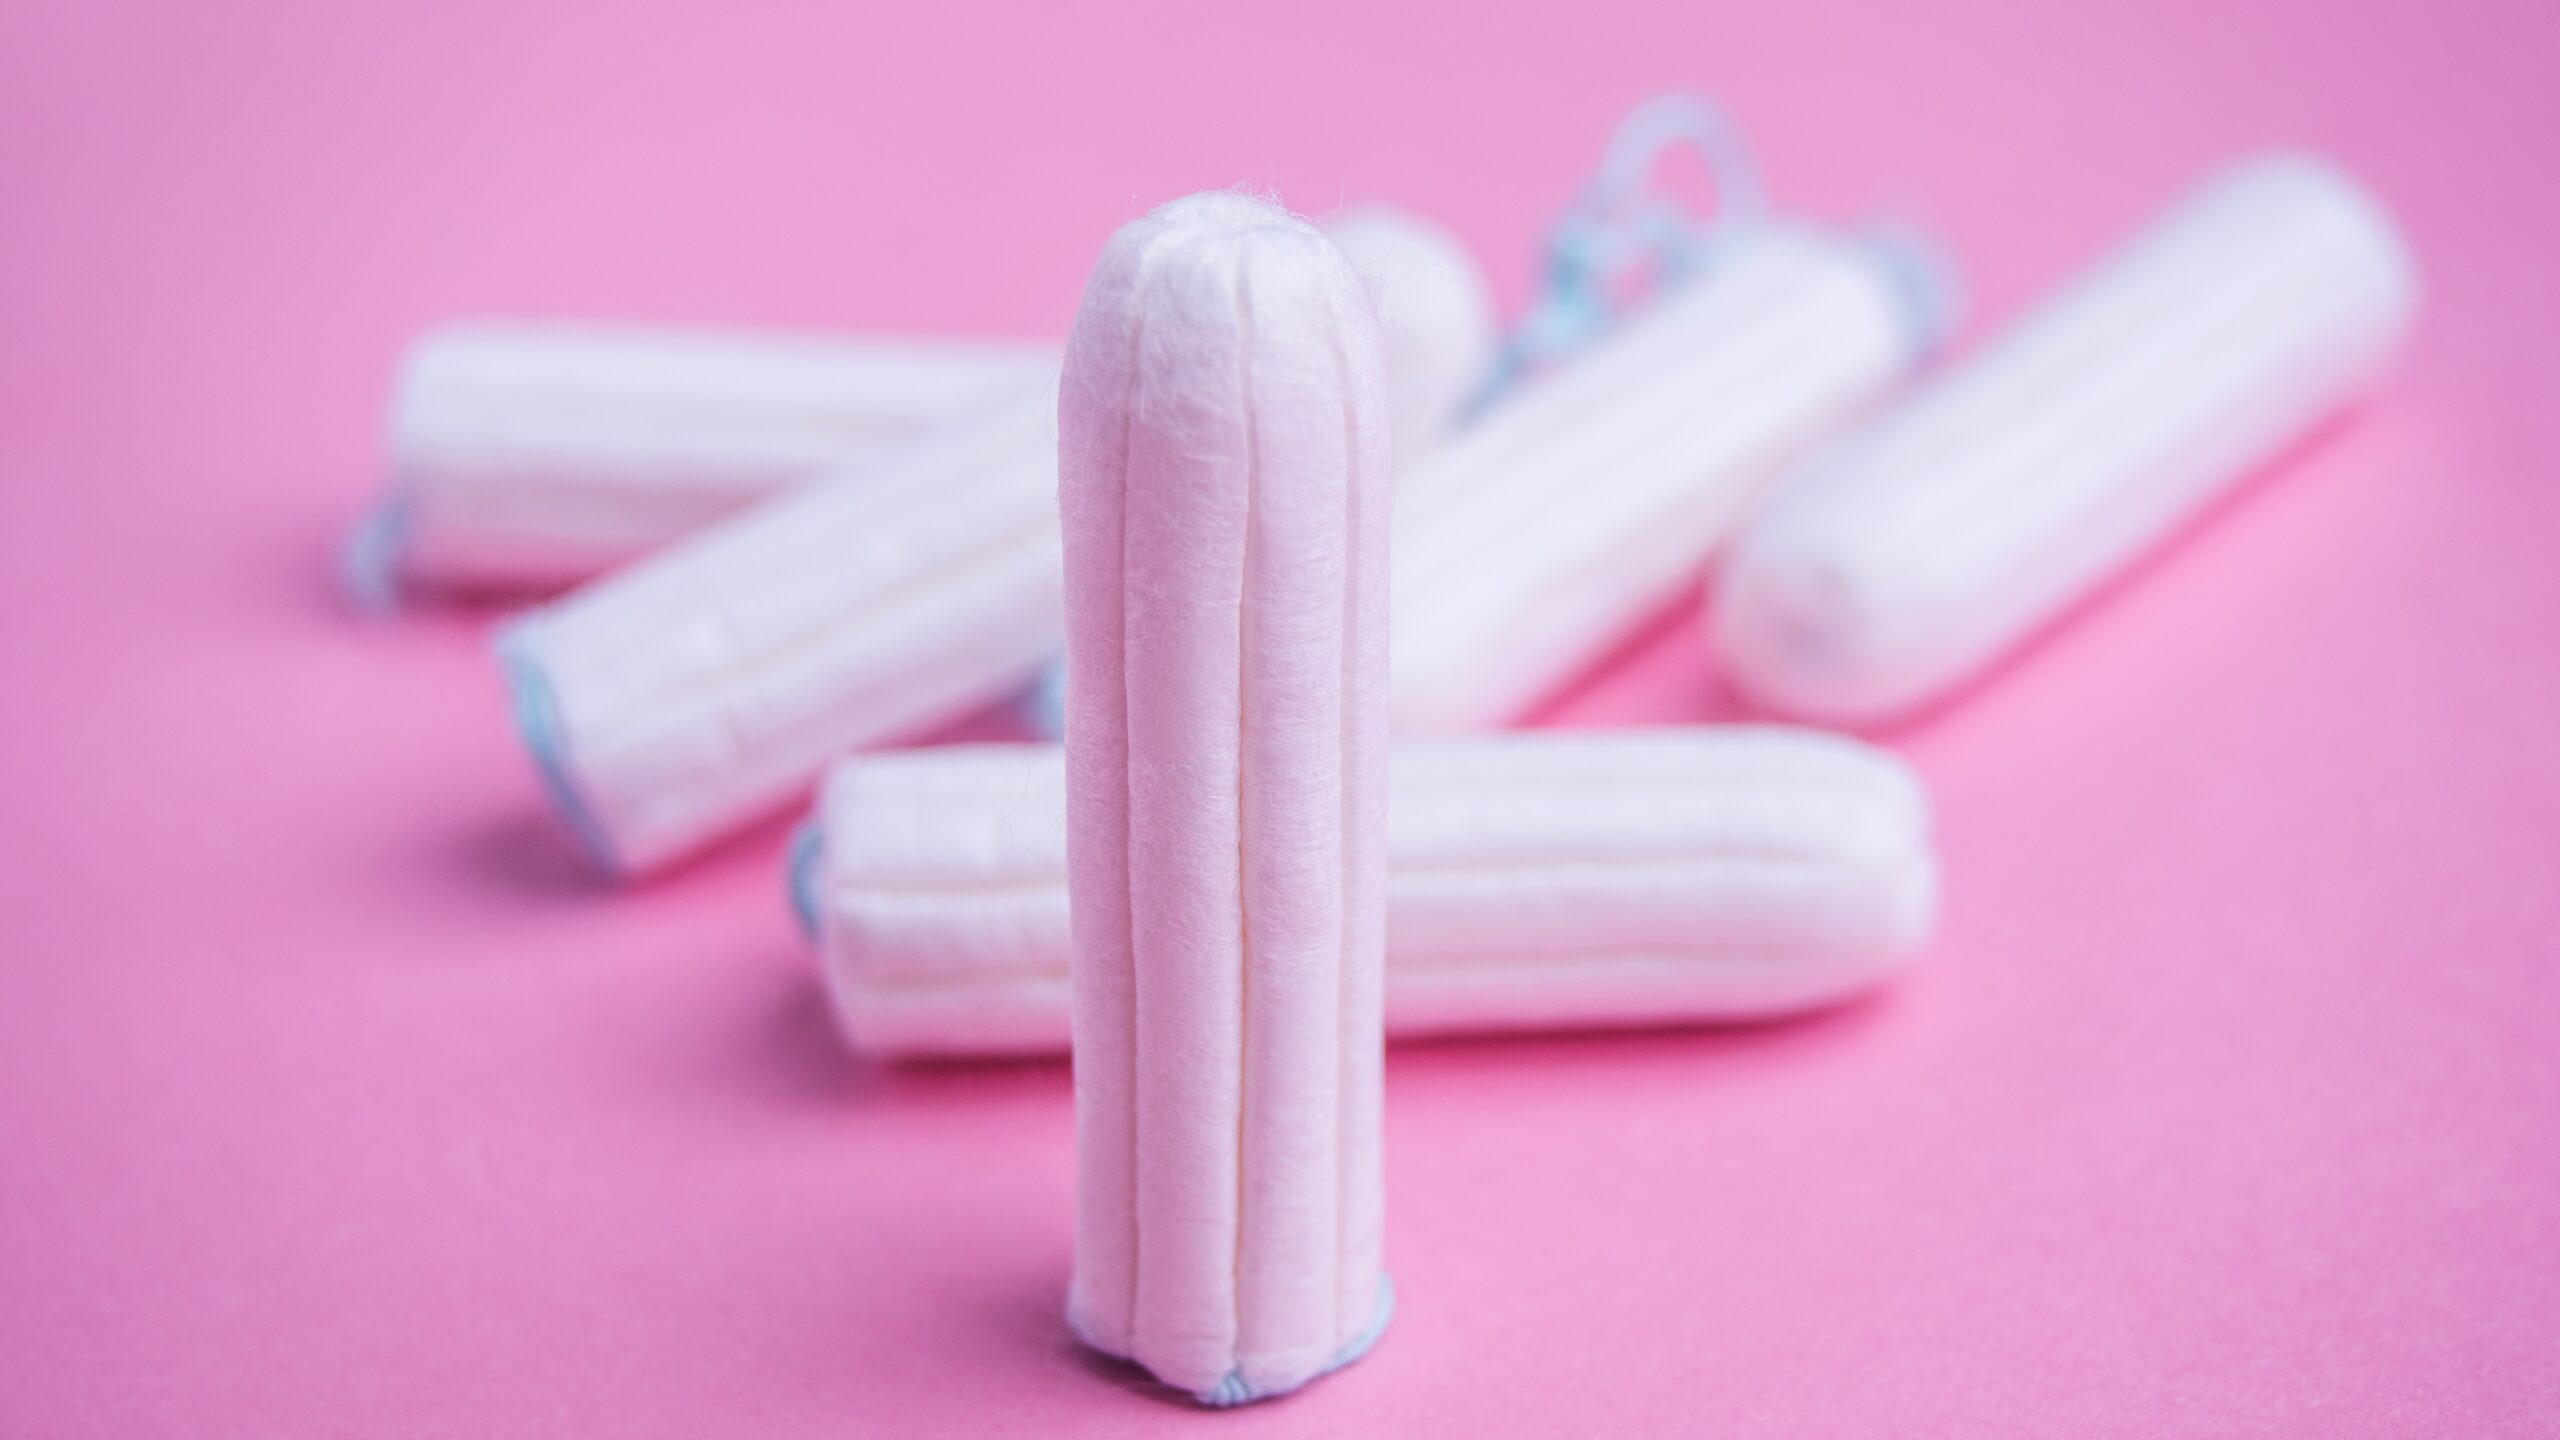 California Will Soon Require Free Menstrual Products In Public Schools and Colleges